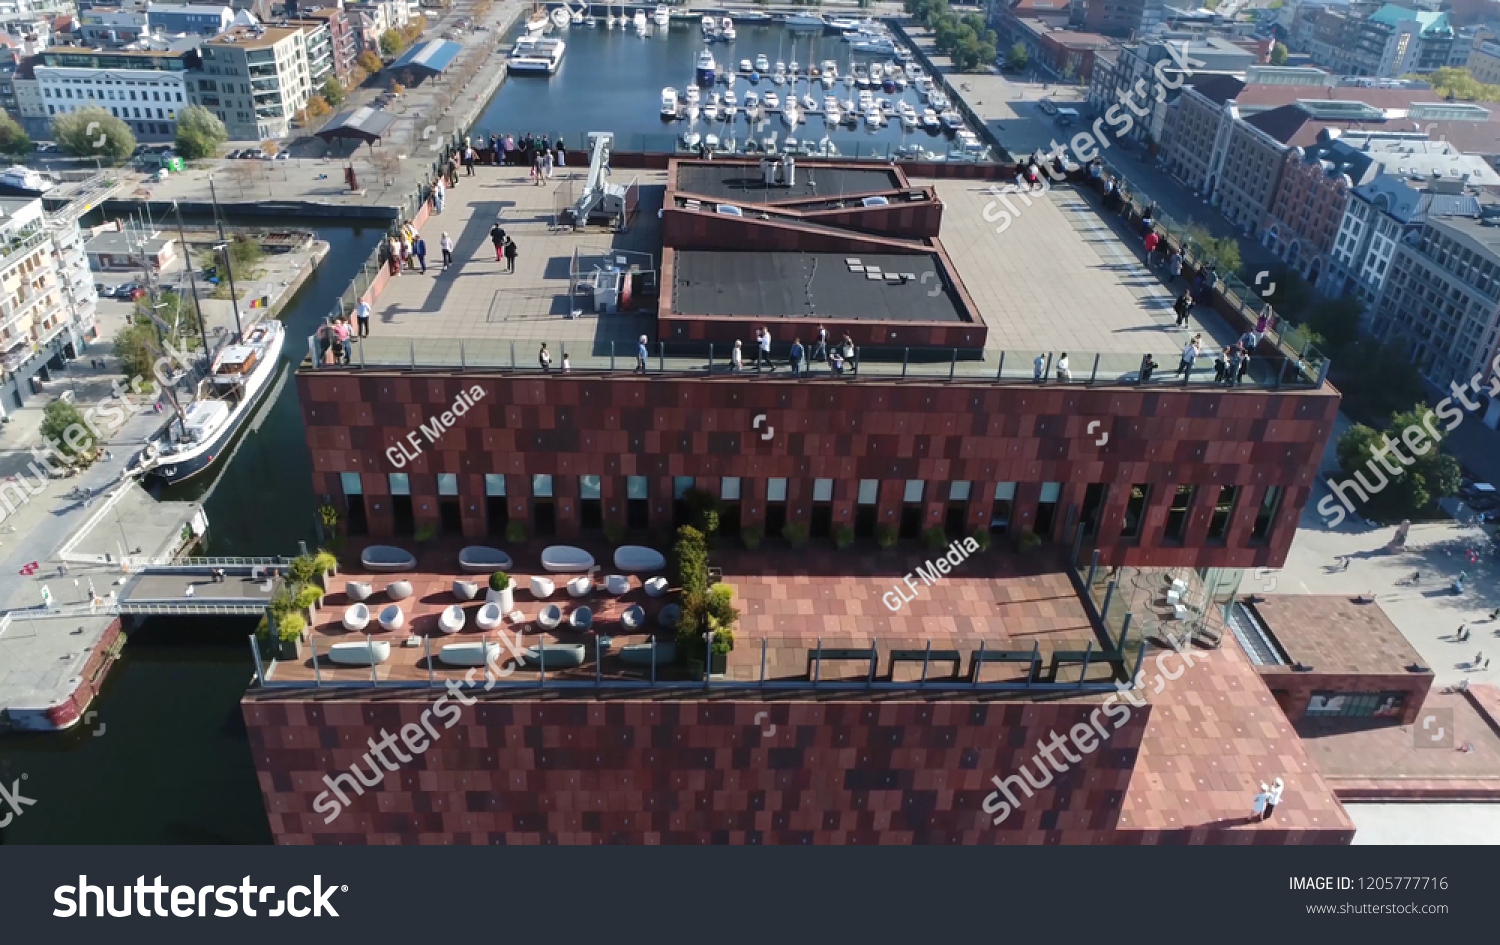 Aerial photo tall building roof in Belgium Antwerp located along the river Scheldt in Eilandje district showing people enjoying the beautiful weather of summer day #1205777716